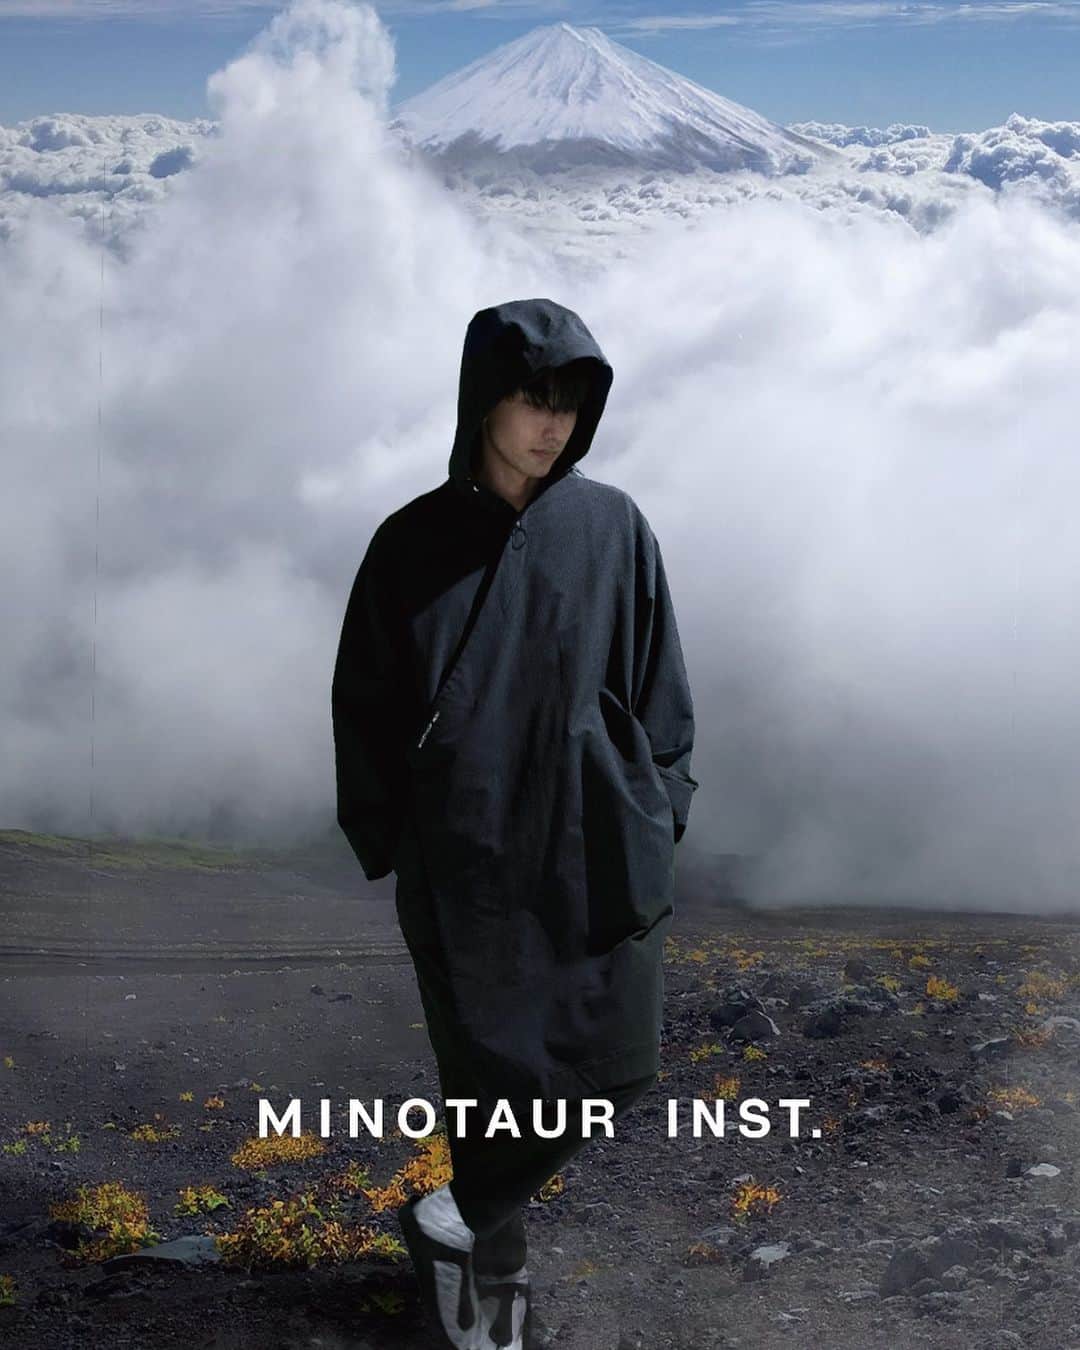 ミノトールのインスタグラム：「MINOTAUR INST. MF HOOD COAT  FUNCTION : WATER REPELLENT WATER ABSORPTION STRETCH MACHINE WASHABLE NO WRINKLES  Made in Japan  高い撥水性、ストレッチ性に優れた機能素材を使用した軽快な和モダンコート。 生地表面は撥水加工仕上げの為、外気の冷たい雨風ををカット。内側は保温性の高いボアフリース仕様で肌触りが良く重ね着を軽減。 家庭用洗濯機で洗濯可能なのでお手入れも簡単。 フロント部分にジップやボタンはなく、脇部分のバックル調整ストラップにより、ワンタッチホールドでの開閉が可能に。  A lightweight modern Japanese coat made of functional material with excellent water repellency and stretch properties. The surface of the fabric has a water-repellent finish, so it blocks the cold rain and wind from outside. The inside is made of boa fleece with high heat retention, which feels good against the skin and reduces layering. It is easy to clean as it can be washed in a household washing machine. There are no zips or buttons on the front, and the buckle adjustment straps on the sides allow you to open and close with one touch.  #minotaur_inst #minotaurinst #minotaur #minotaur_shop #ミノトールインスト #ミノトール  #zen #mindfulness #mindfulnesswear #機能アウター #テクニカルフード #techpants #機能パンツ #relaxsmart #リラックススマート #はかまパンツ #hakamapants #hakama #japanesemodan」